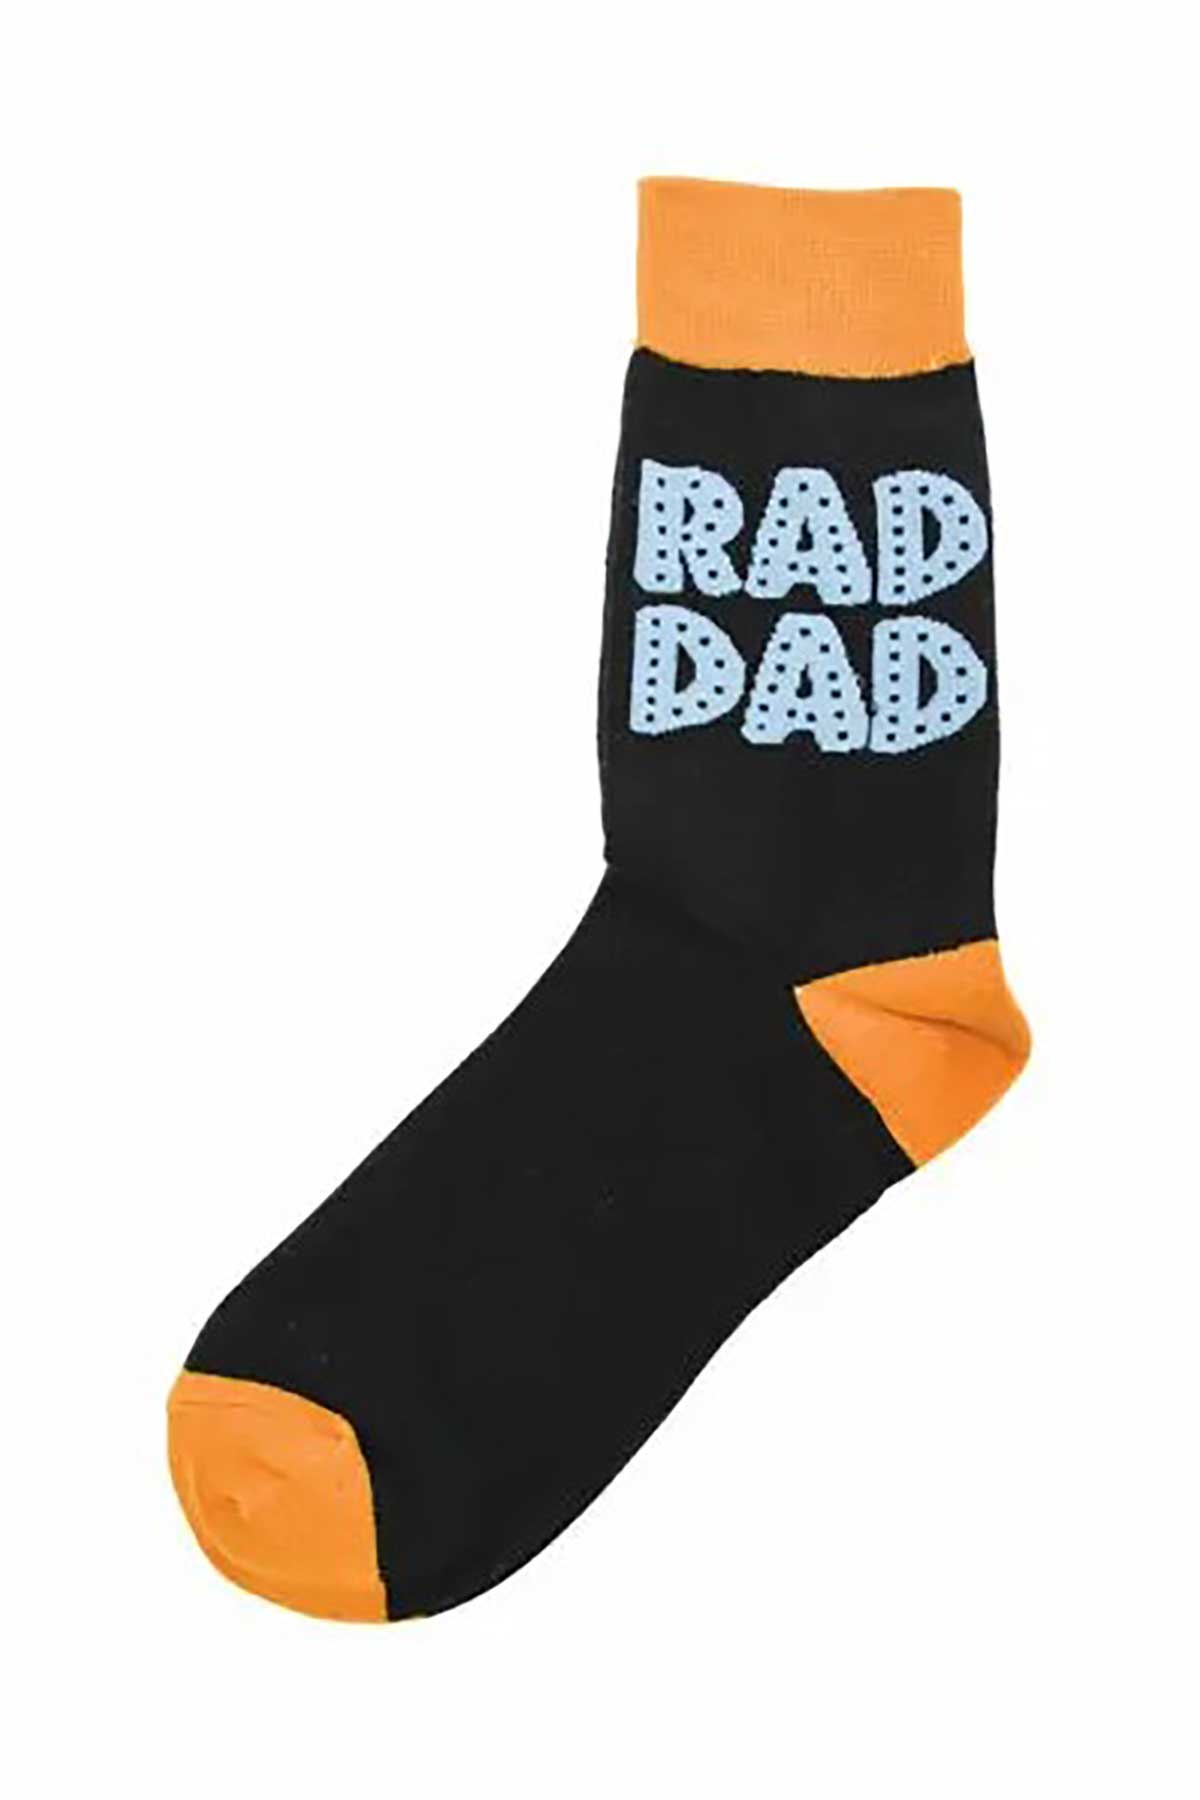 Annabel Trends Men's Boxed Socks - Glad You're My Dad